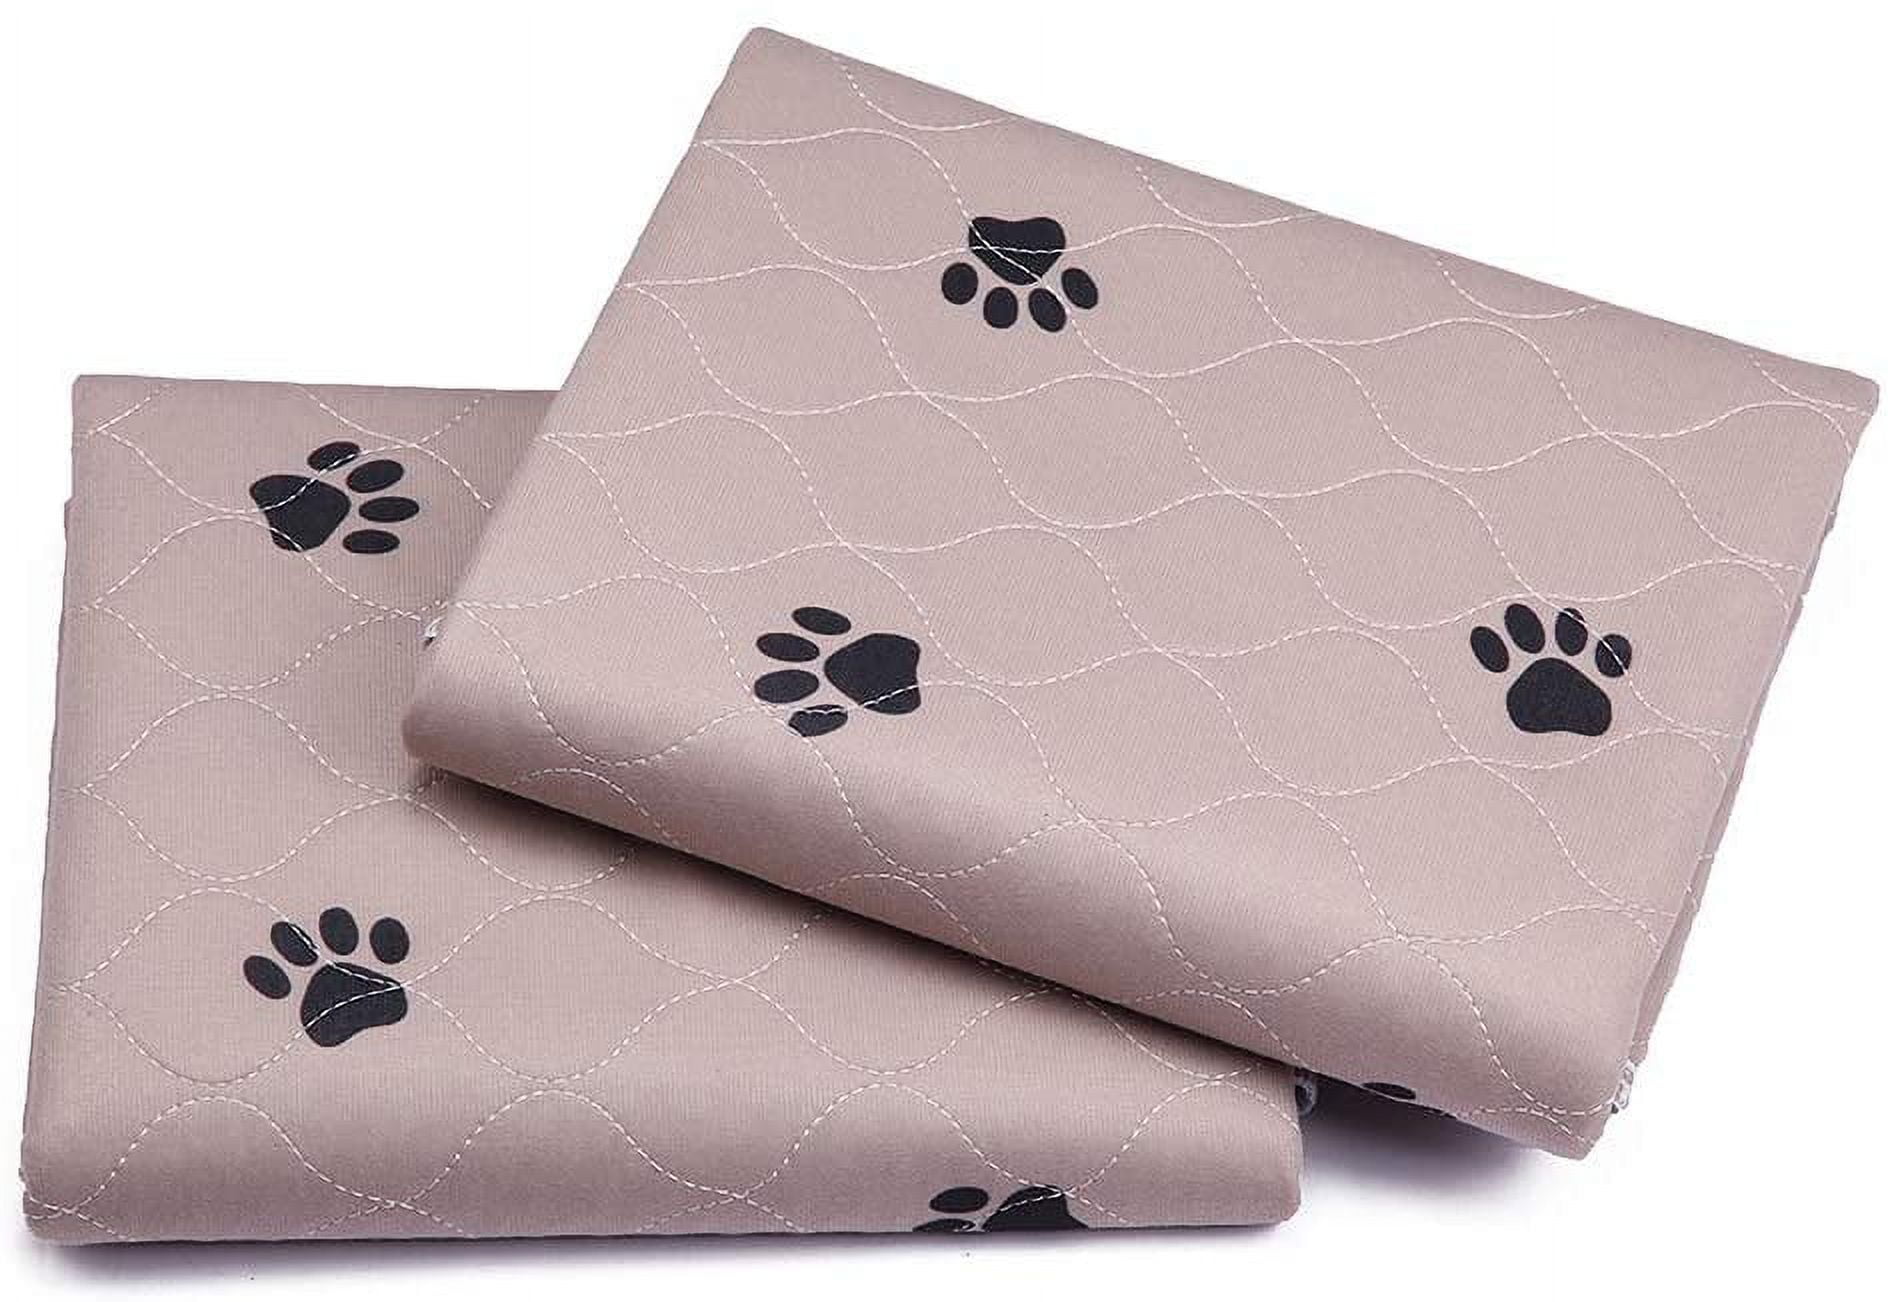 Washable Puppy Pee Pads, Sun & Palm Tree Designs, Large Super Absorbent  Potty Mats, Dog Housebreaking, Crate Training, Reusable, Ecofriendly 